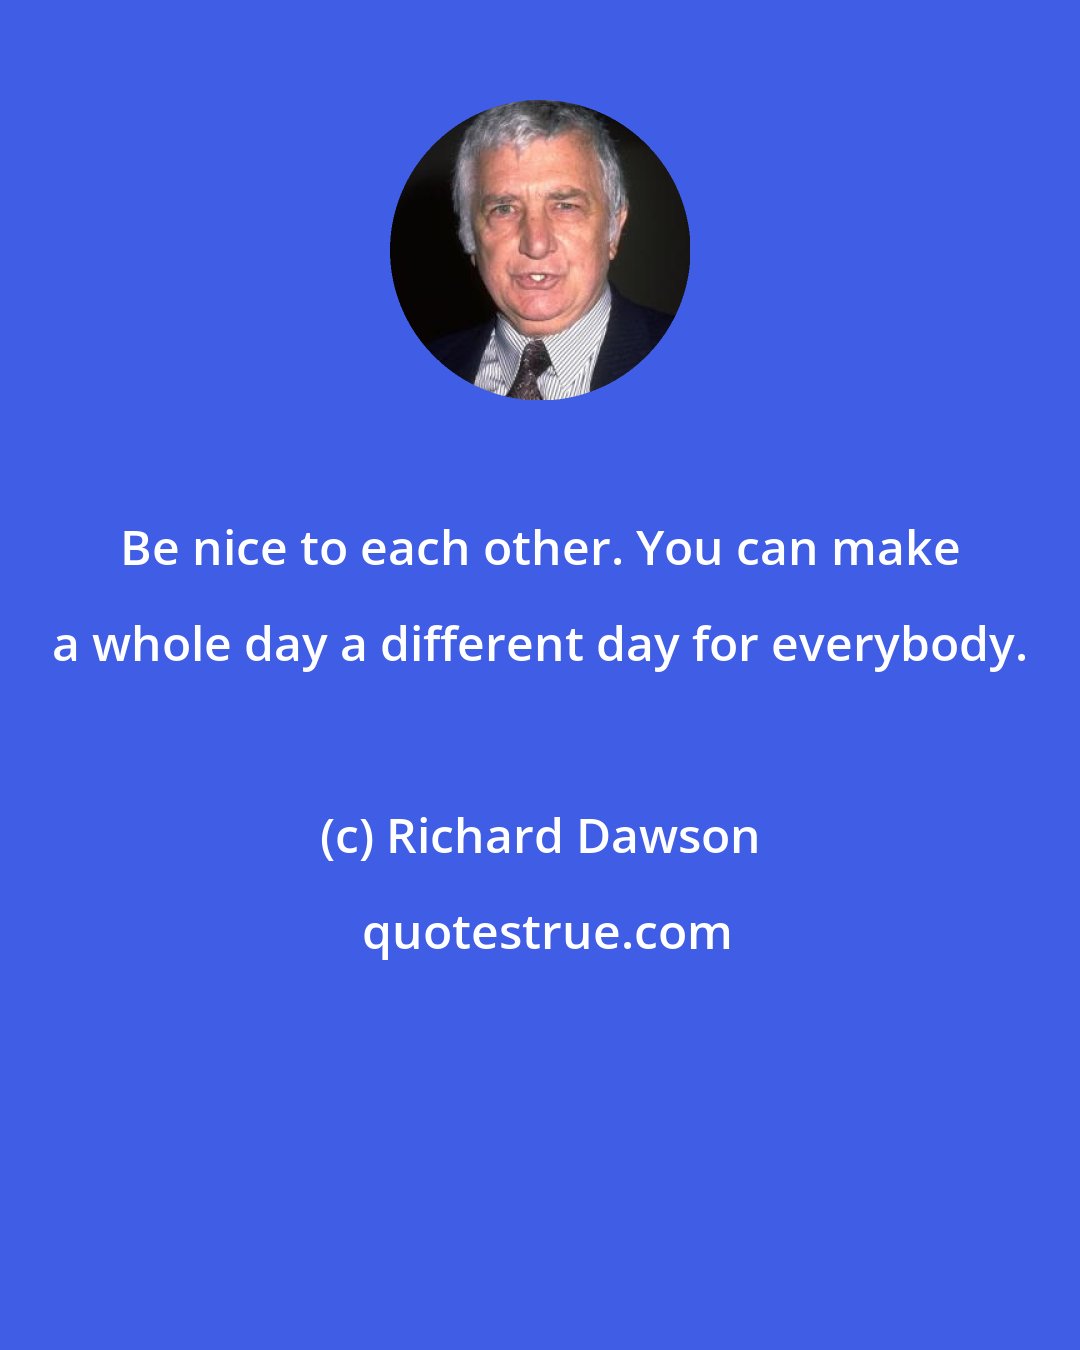 Richard Dawson: Be nice to each other. You can make a whole day a different day for everybody.